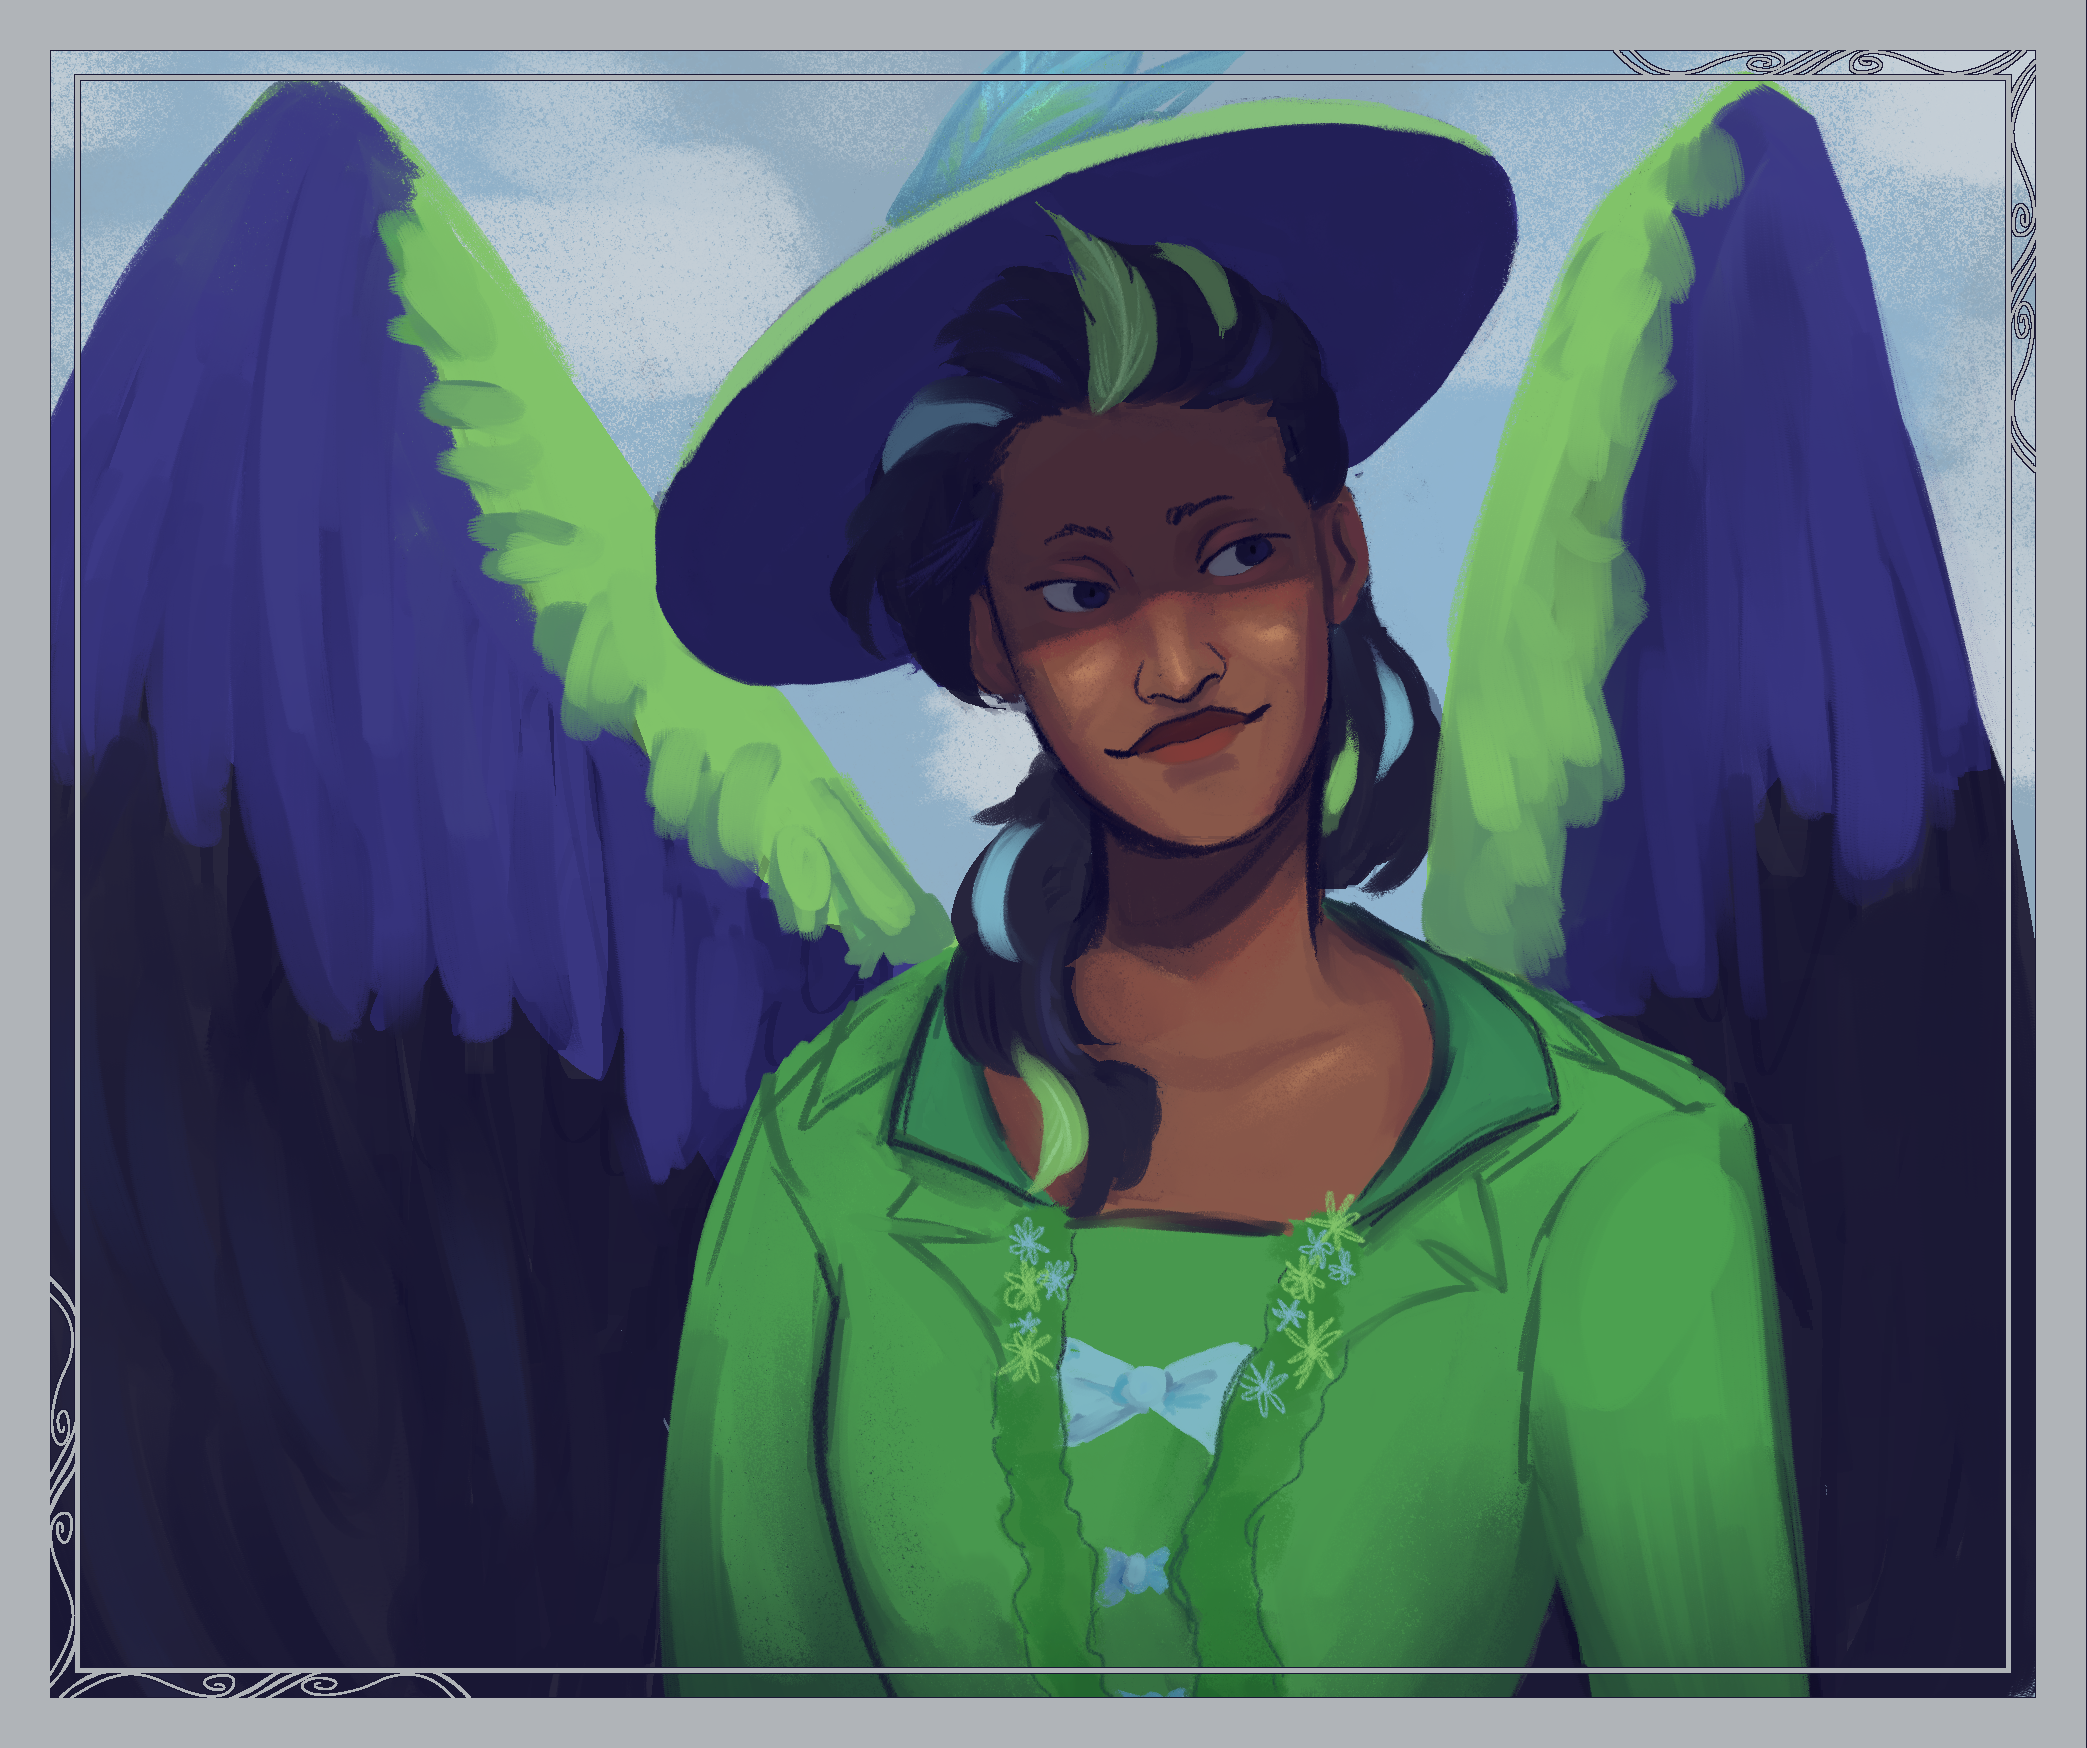 A digital painting of Iris from about the waist up. She is a dark skinned woman with large green and dark blue wings. Her hair is also feathers of matching colors. She has on a green dress and hat from the mid 18th century. Her hat is casting a shadow on her face and she is smiling at something off to the side, head tilted.